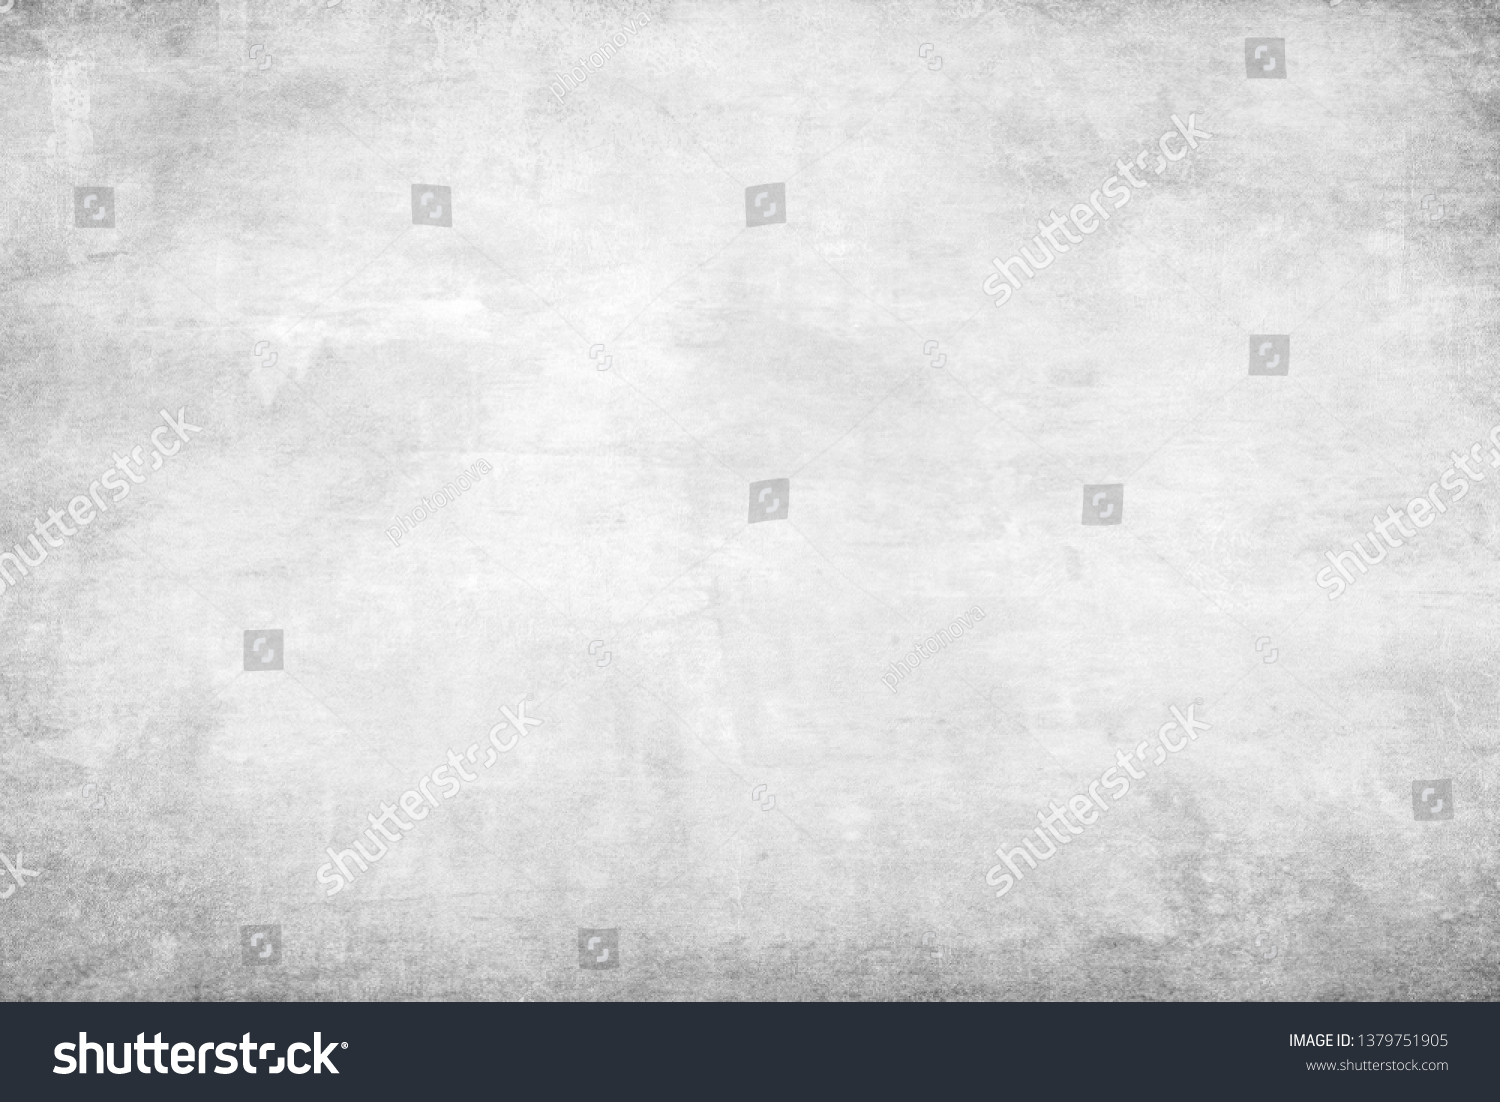 Monochrome texture with white and gray color. Grunge old wall texture, concrete cement background.